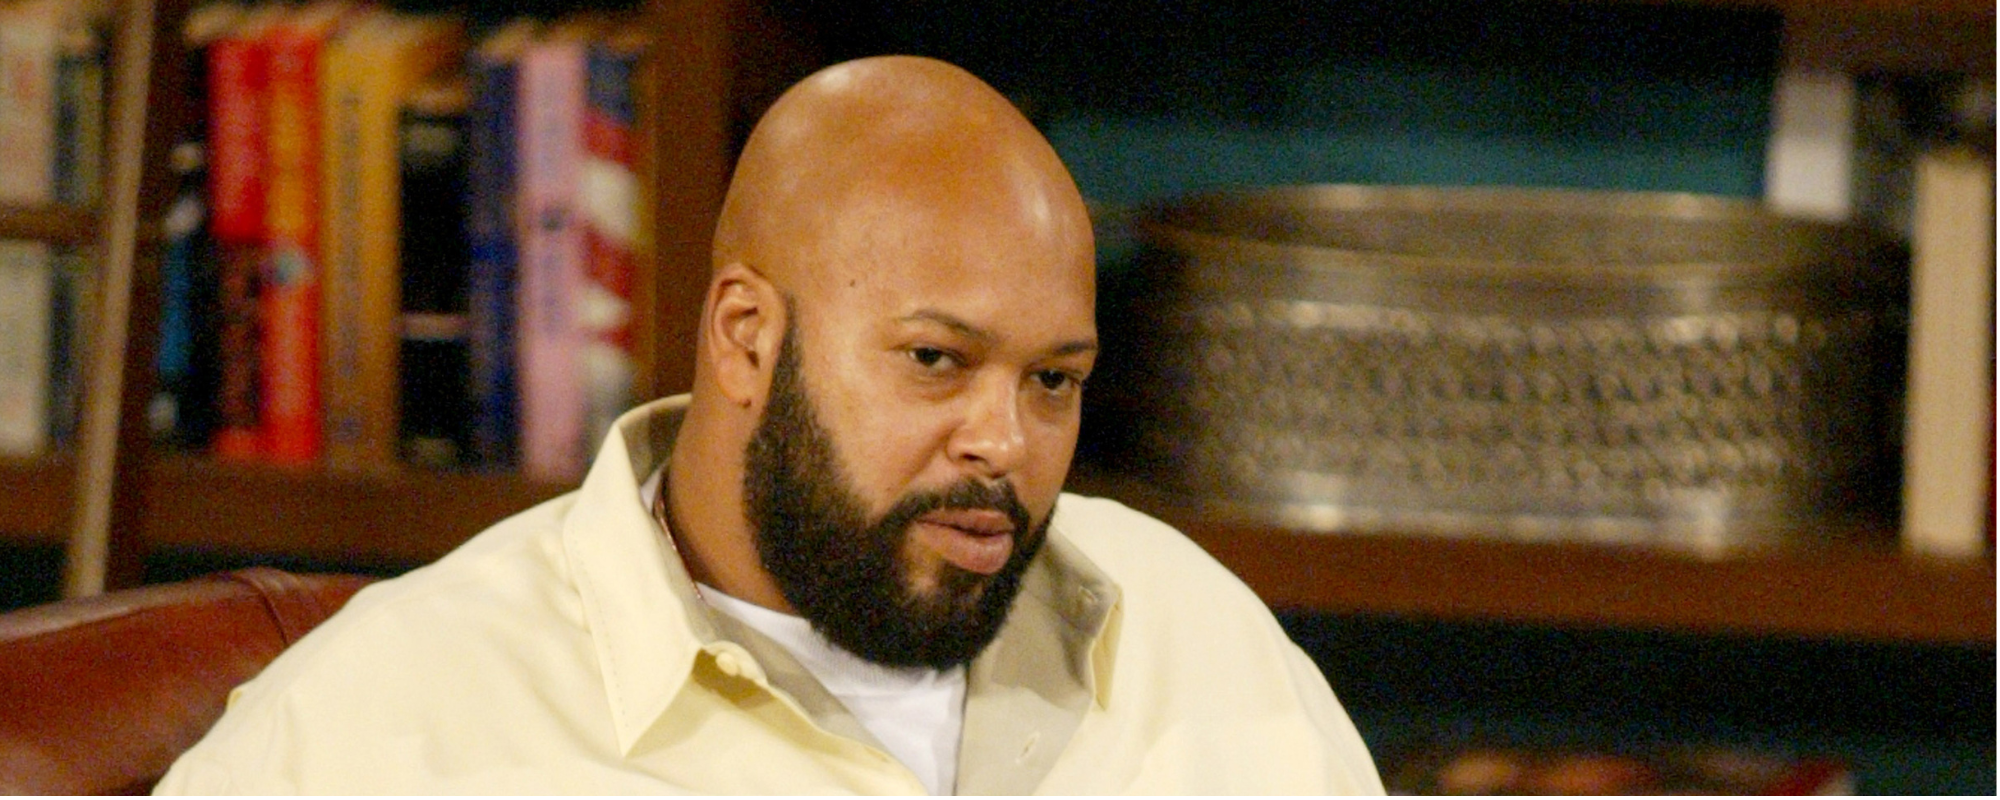 Recap: Suge Knight Opens Up About Negotiations with Eazy-E and Rapper Pensions on ‘Collect Call’ Episode 3